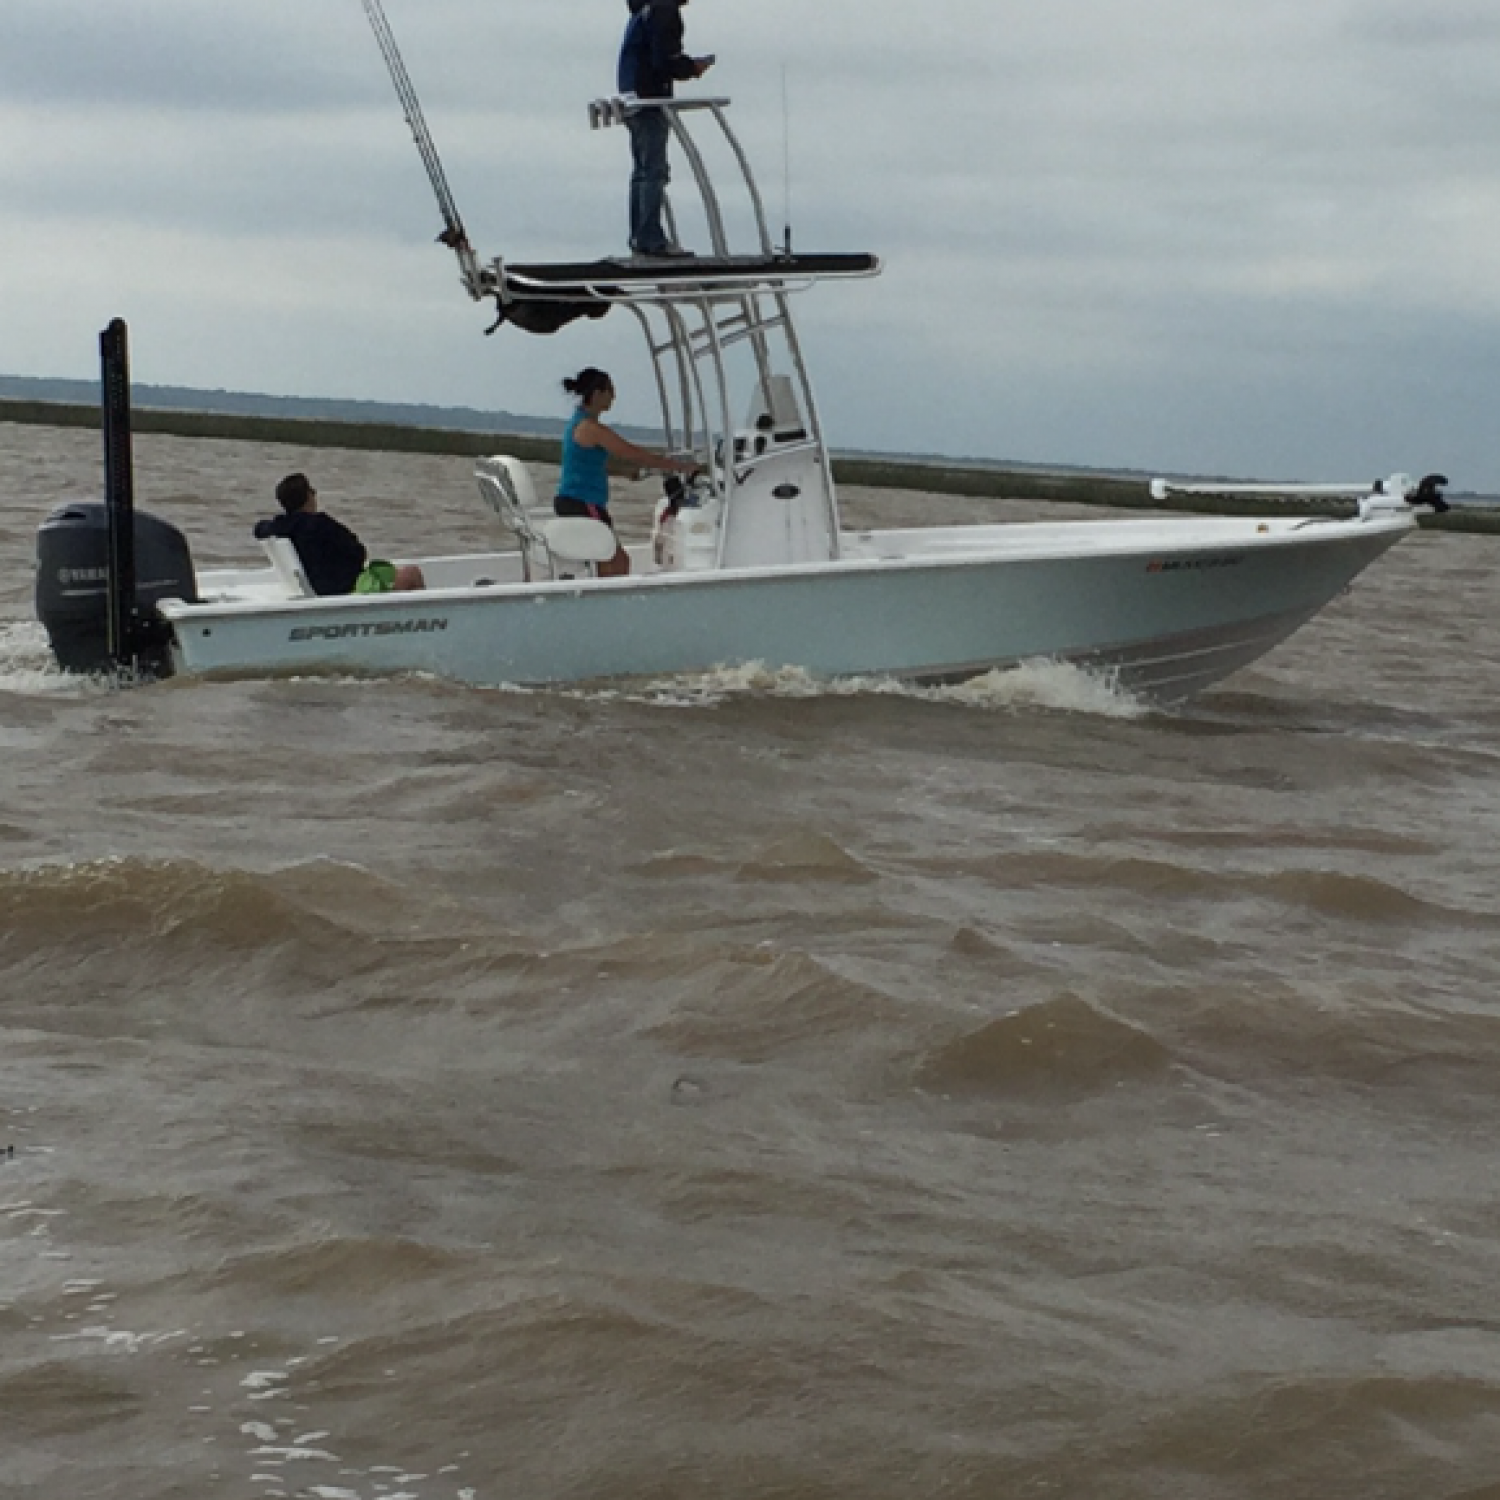 Photo was taken in vermillion bay, South Louisiana. Conditions were not ideal, but couldn't res...